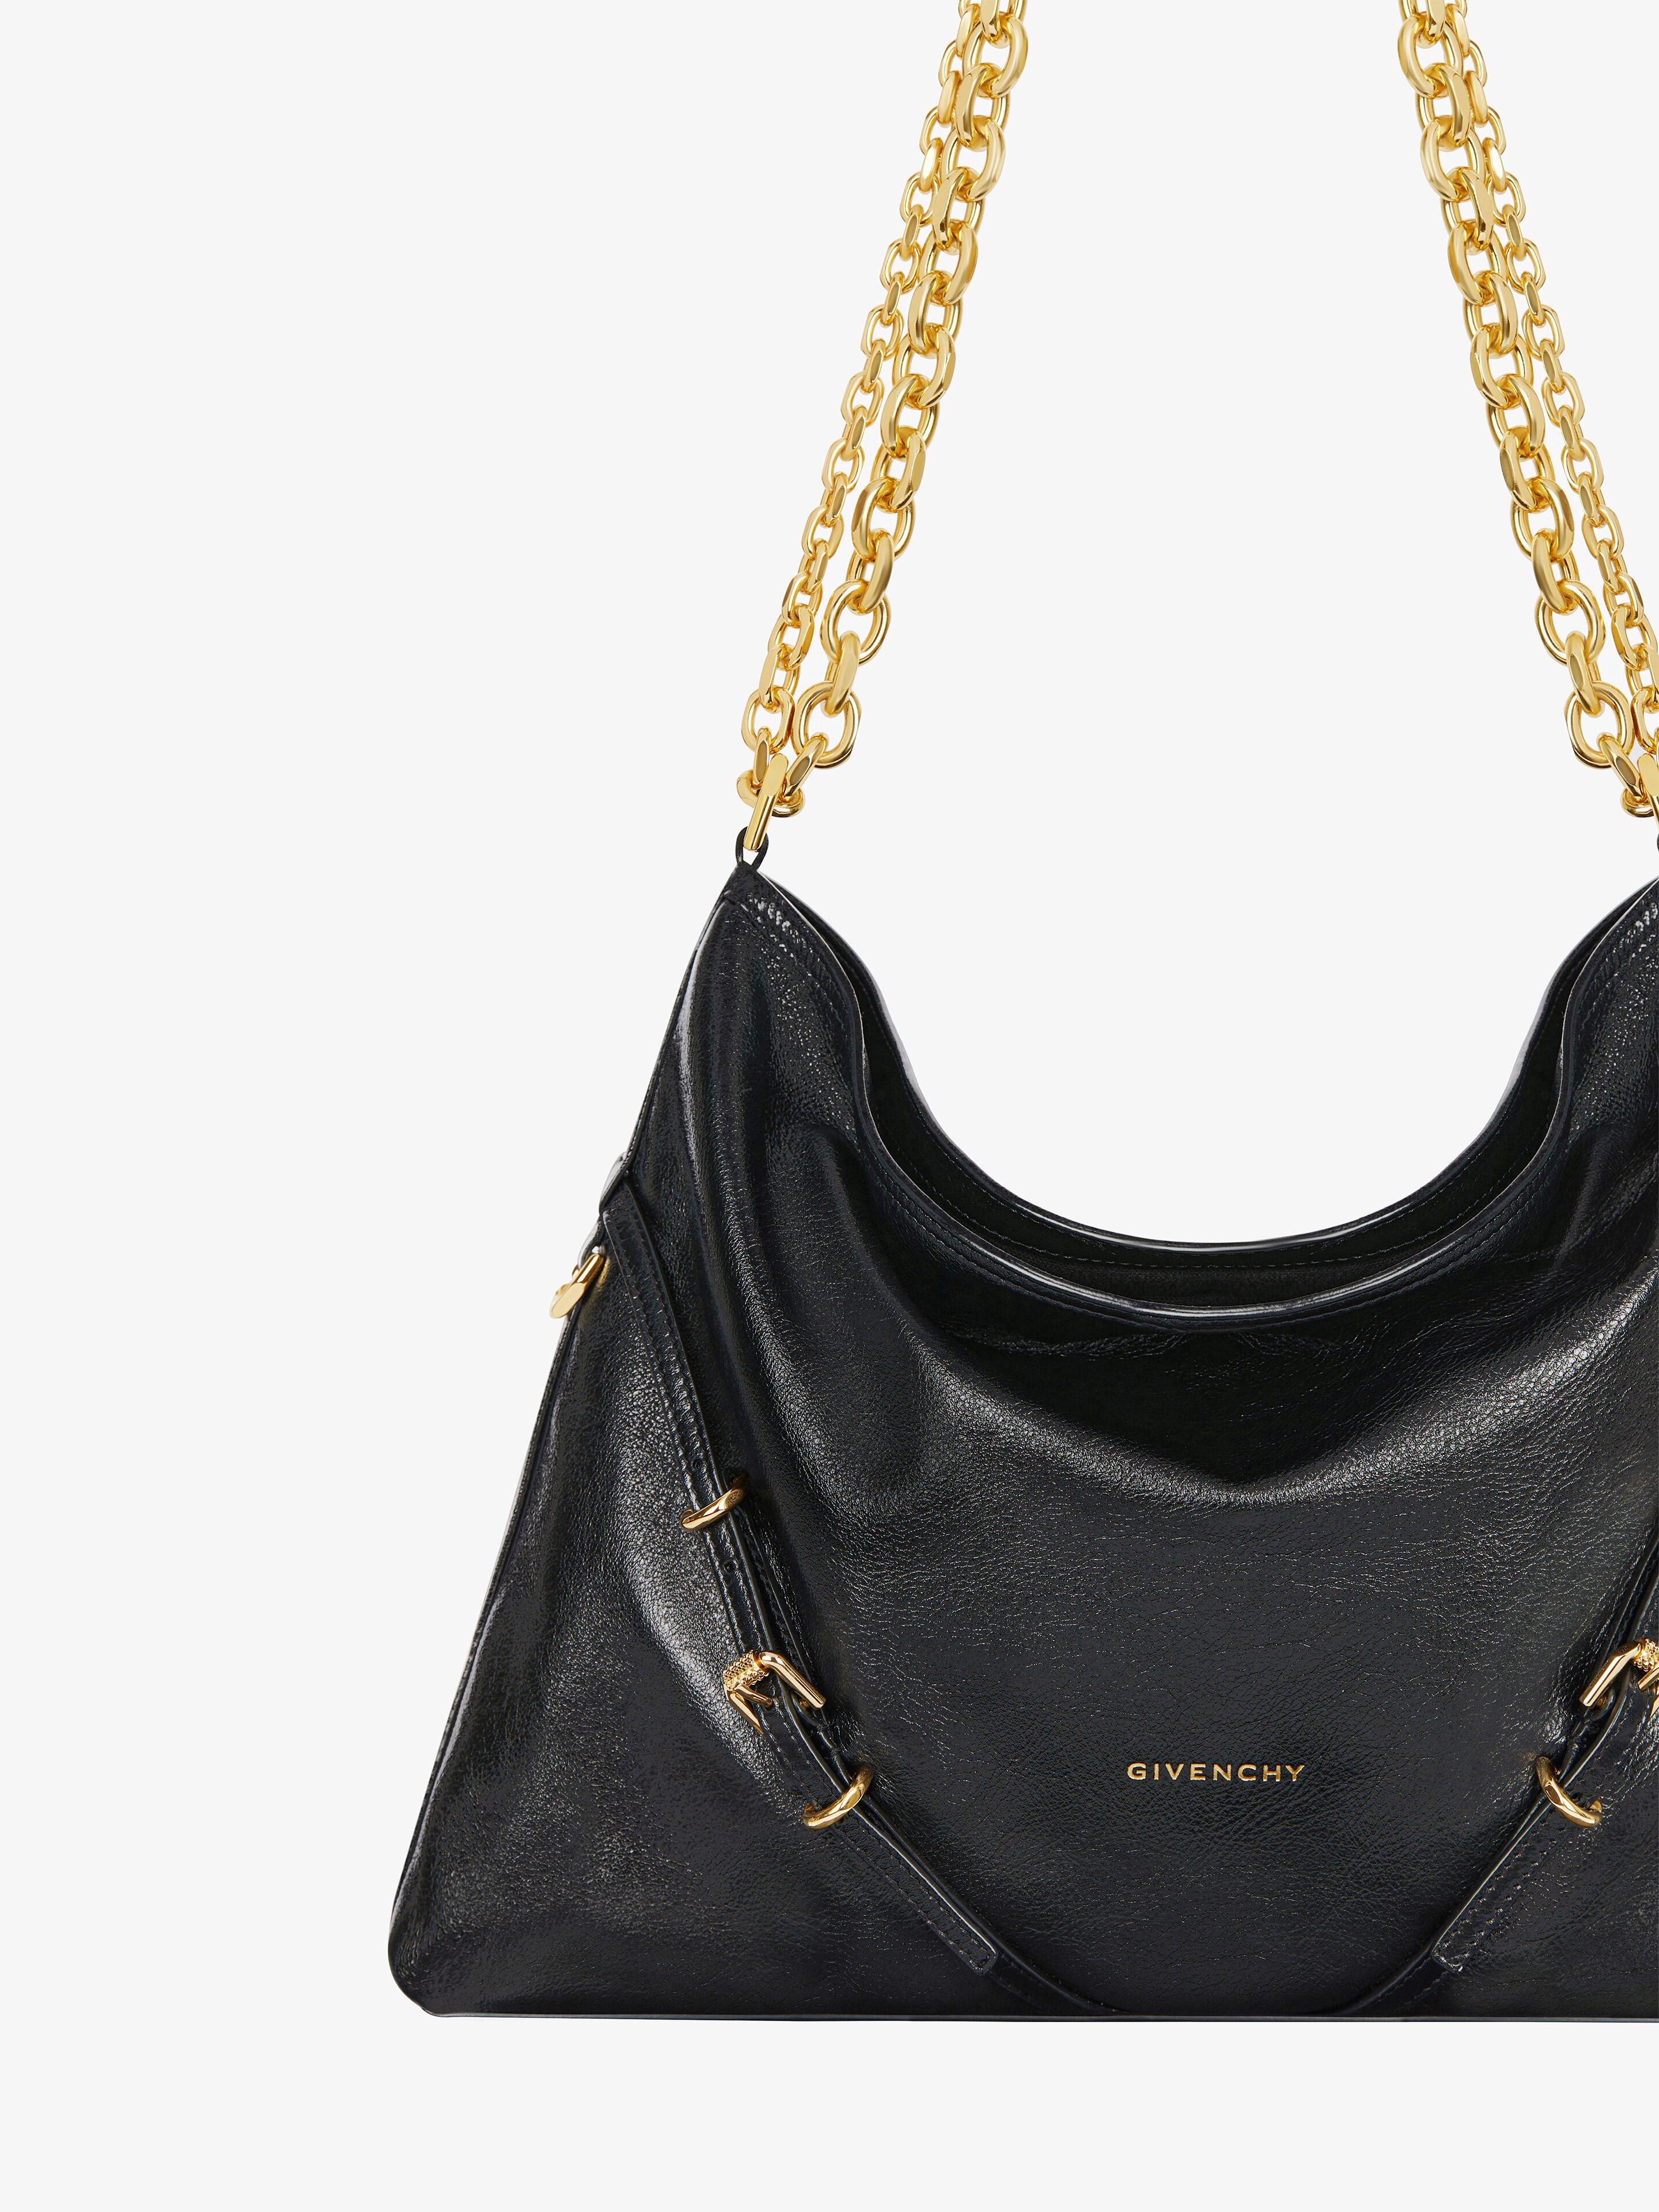 MEDIUM VOYOU CHAIN BAG IN LEATHER - 6